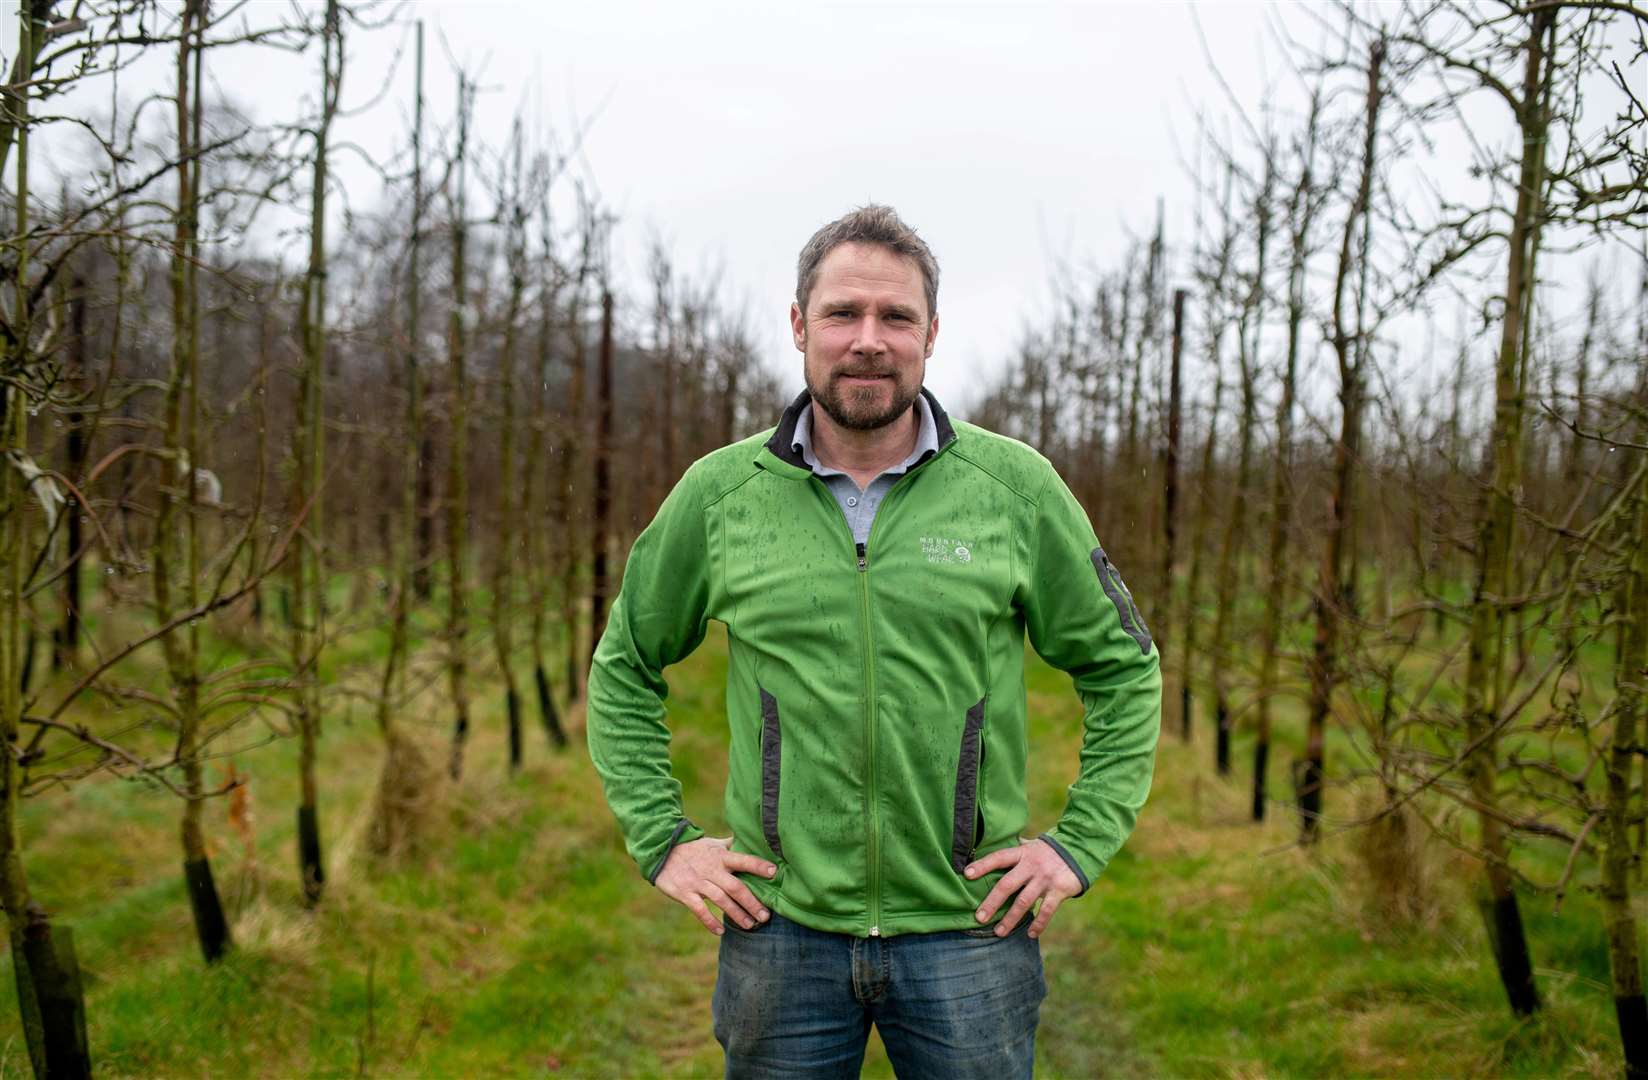 James Smith is a fifth-generation fruit grower from Loddington Farm in Maidstone. Picture: SNWS